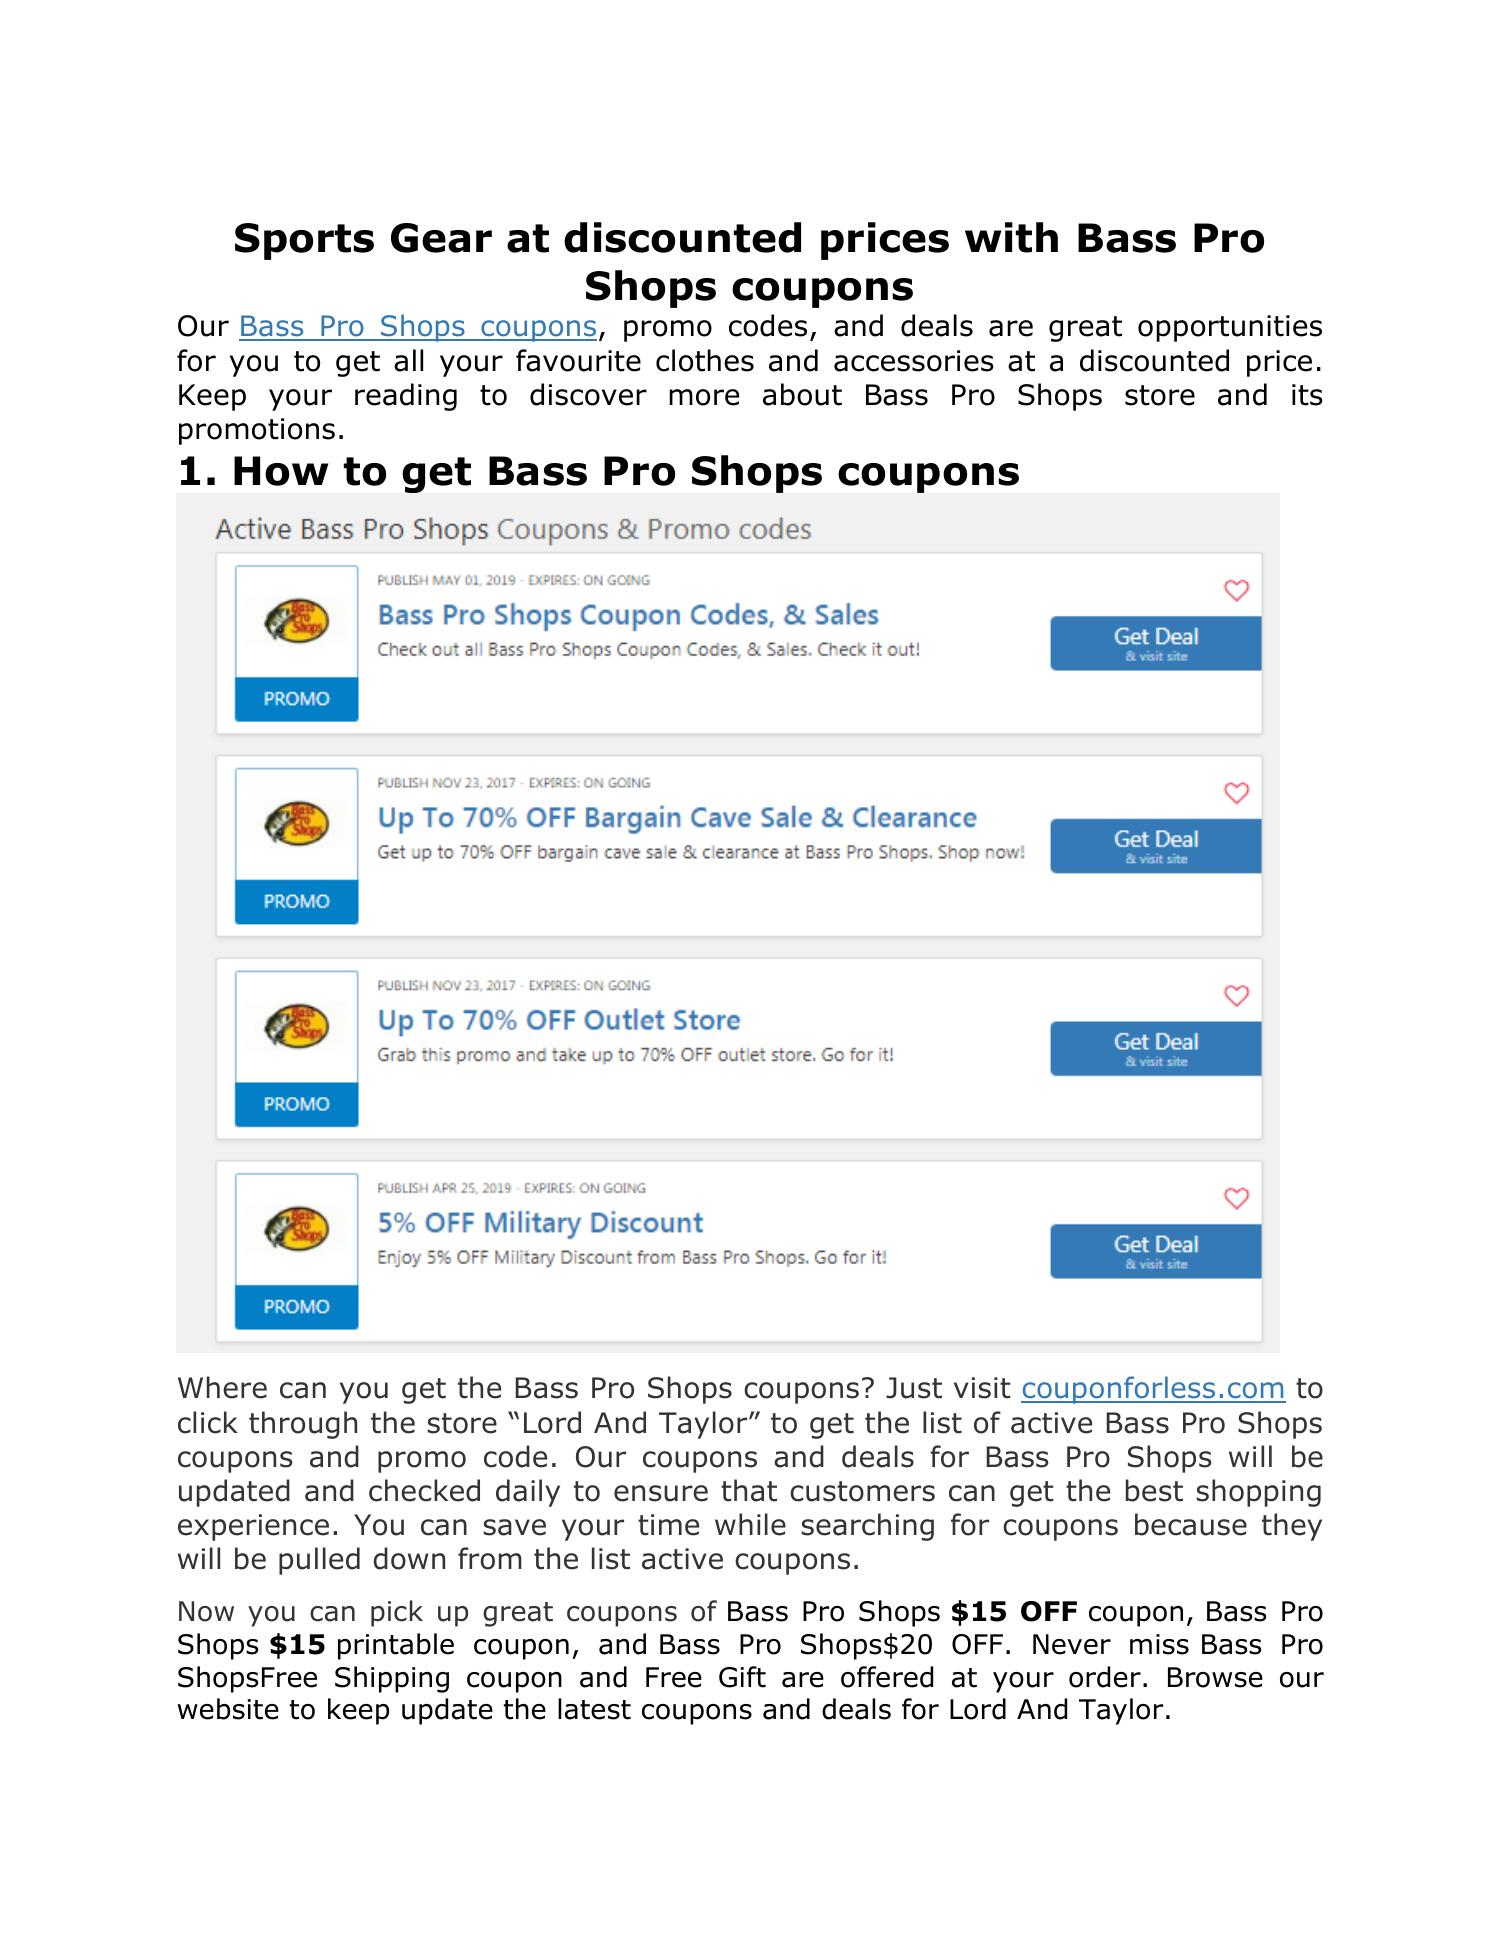 sports-gear-at-discounted-prices-with-bass-pro-shops-coupons-doc-docdroid